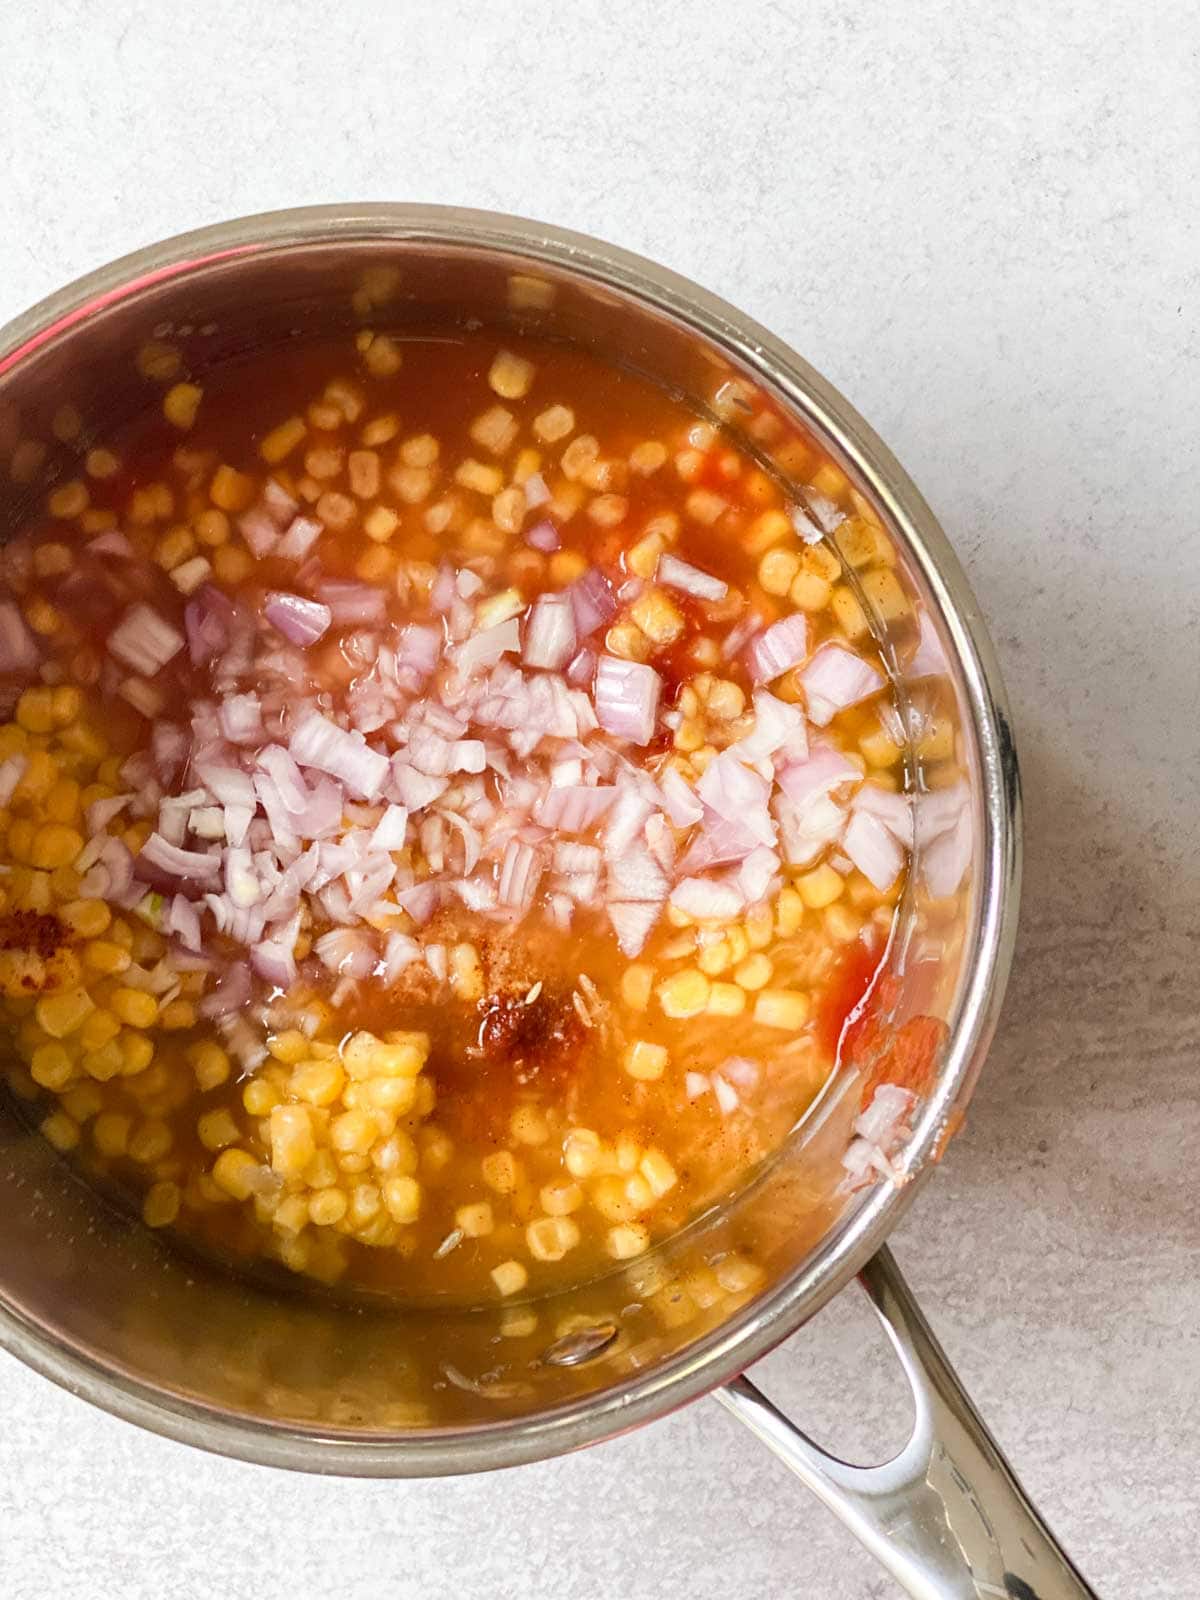 Corn, shallots, tomatoes, and rice in a pot.